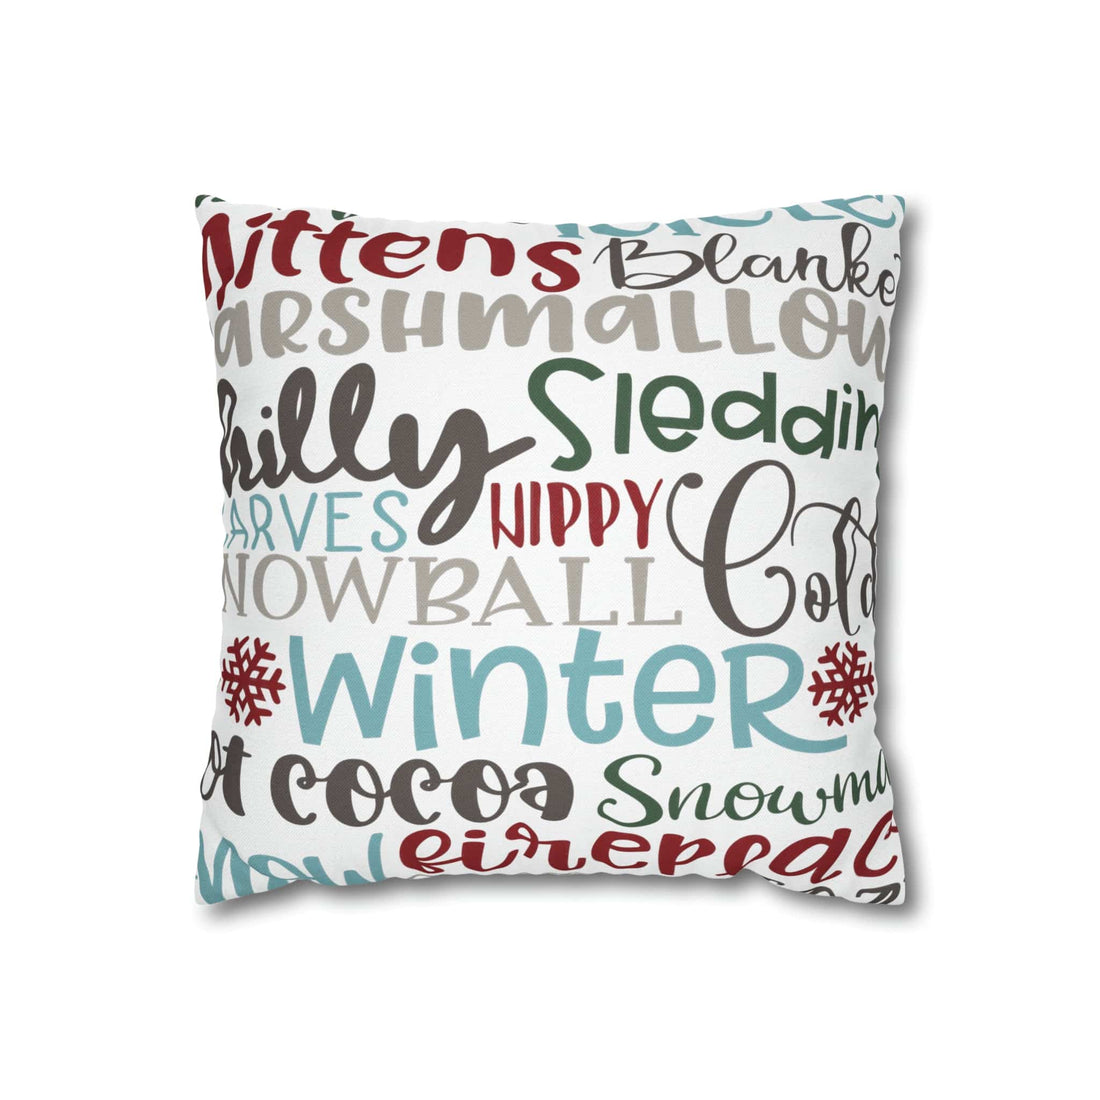 Kate McEnroe New York Christmas Throw Pillow Cover, Mittens, Mashmallows, Snowballs, Sledding, Chilly Winter Word Art Cushion Covers, Farmhouse DecorThrow Pillow Covers13449205045809851454